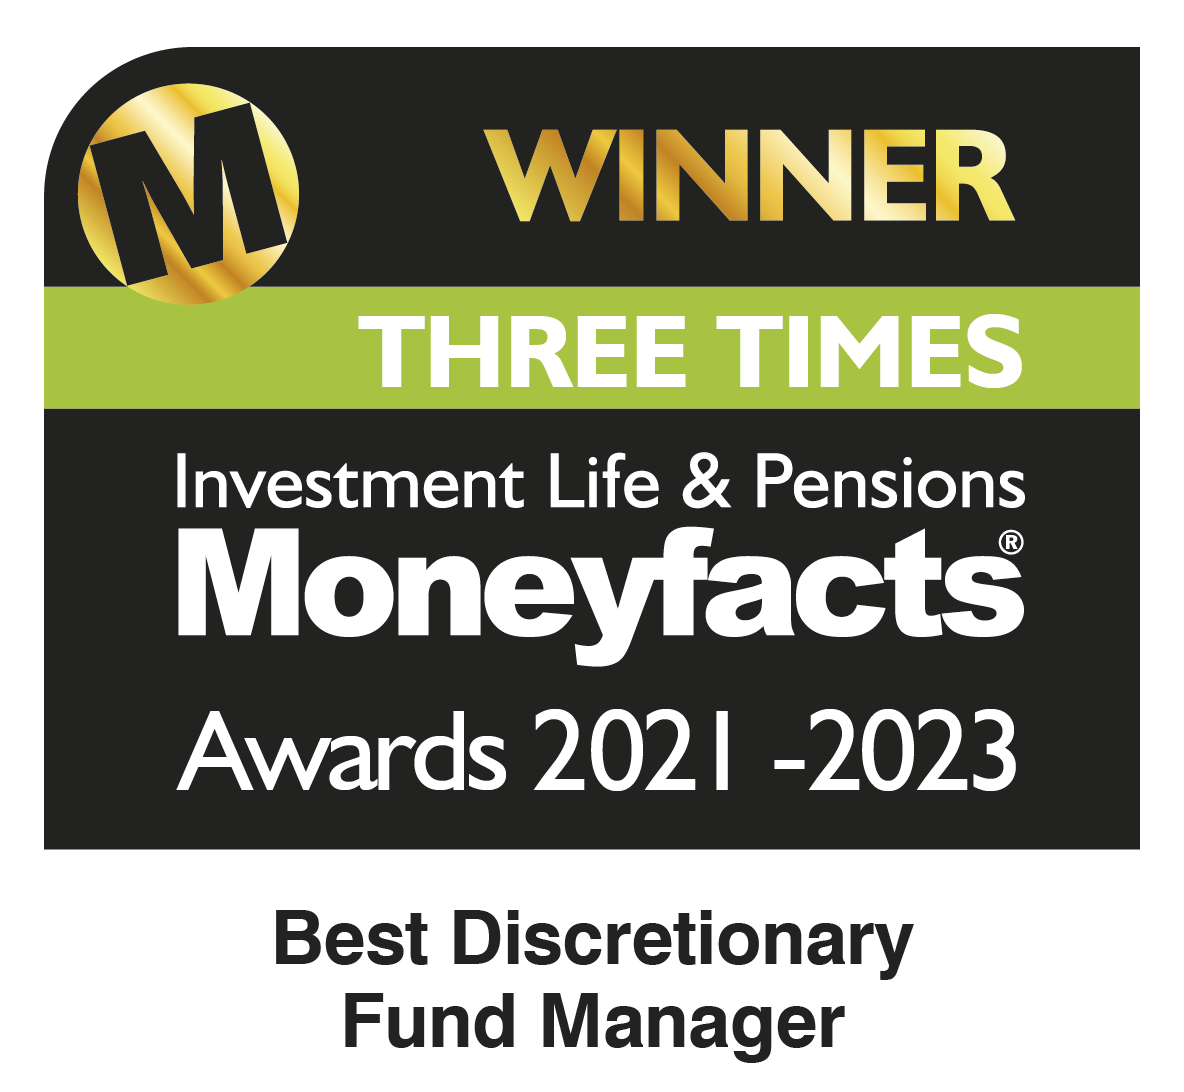 Moneyfacts Awards logo for Best Discretionary Fund Manager